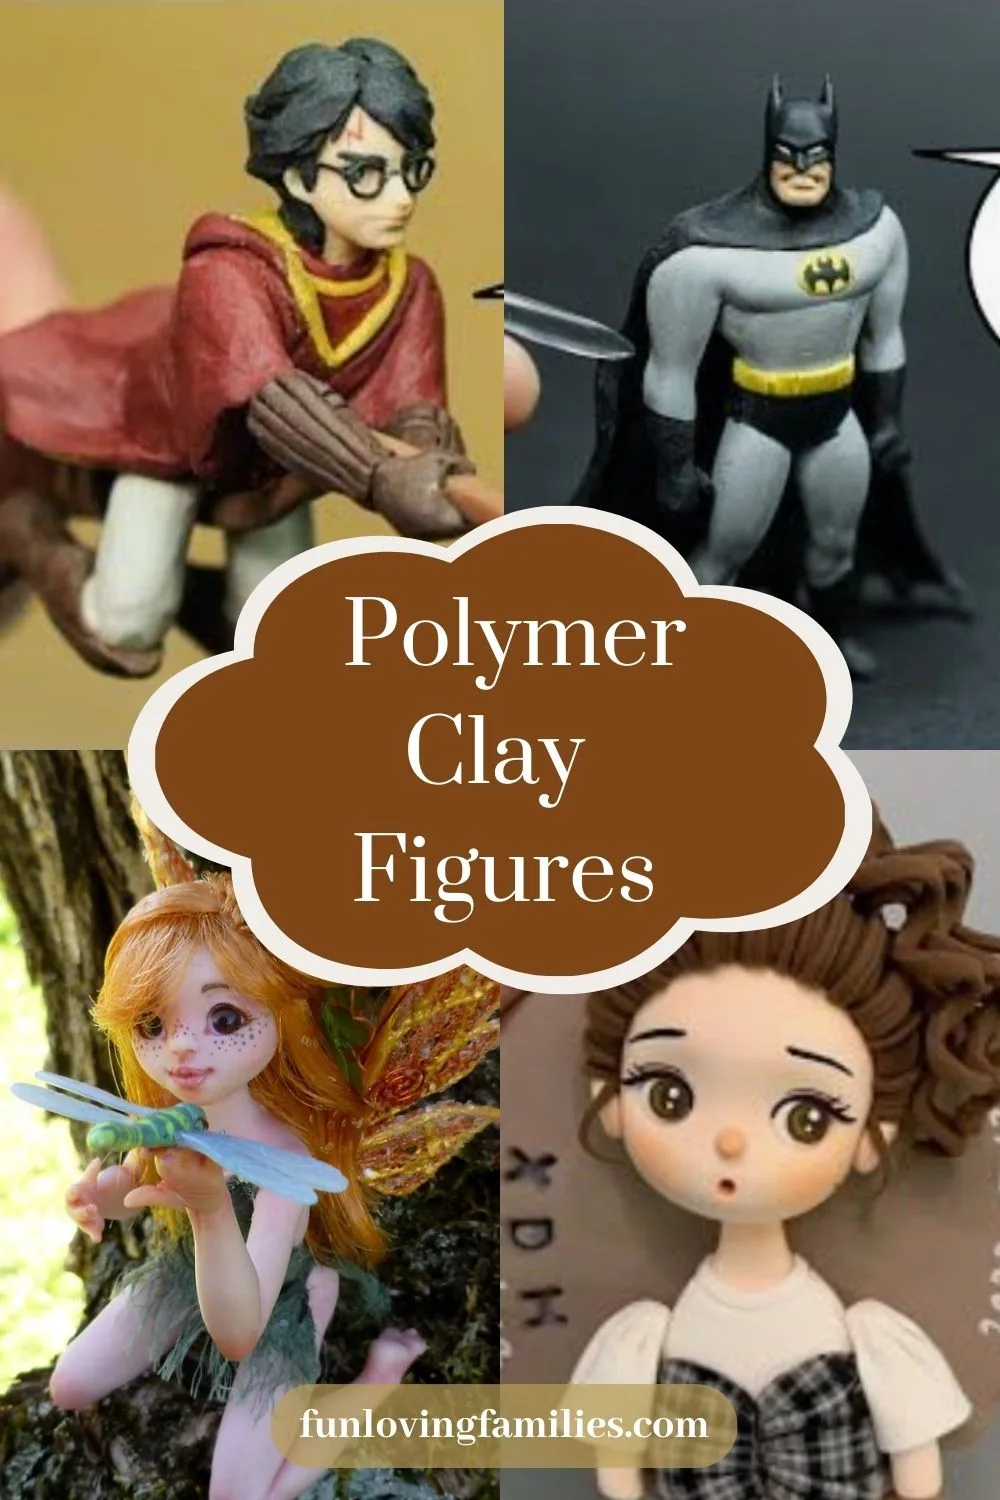 Polymer Clay Figures